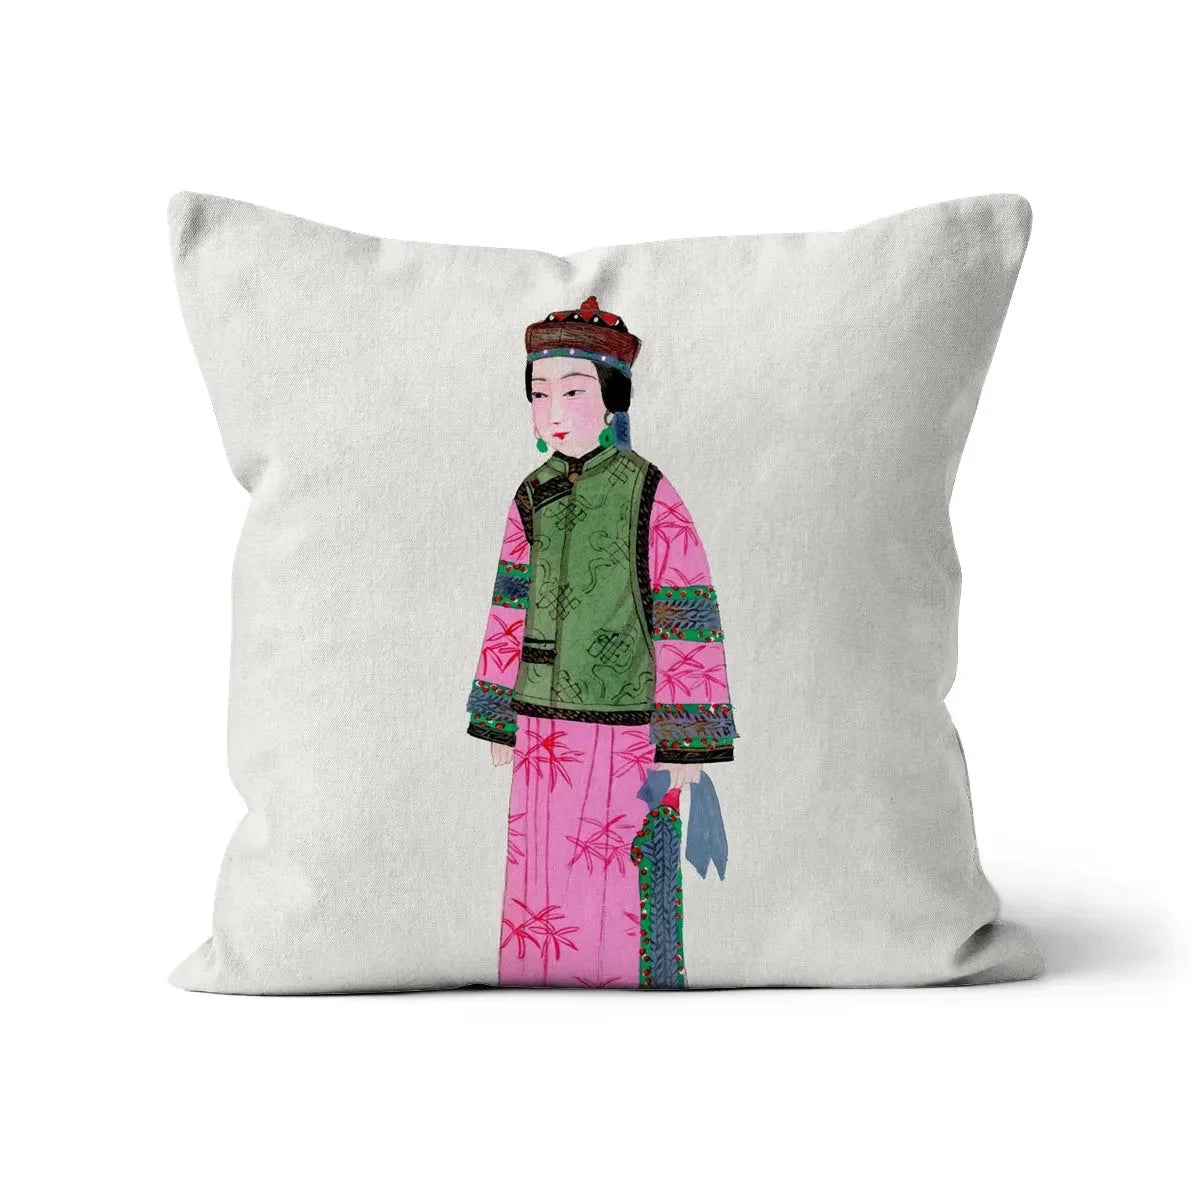 Chinese Noblewoman In Winter Cushion - Linen / 16’x16’ - Throw Pillows - Aesthetic Art